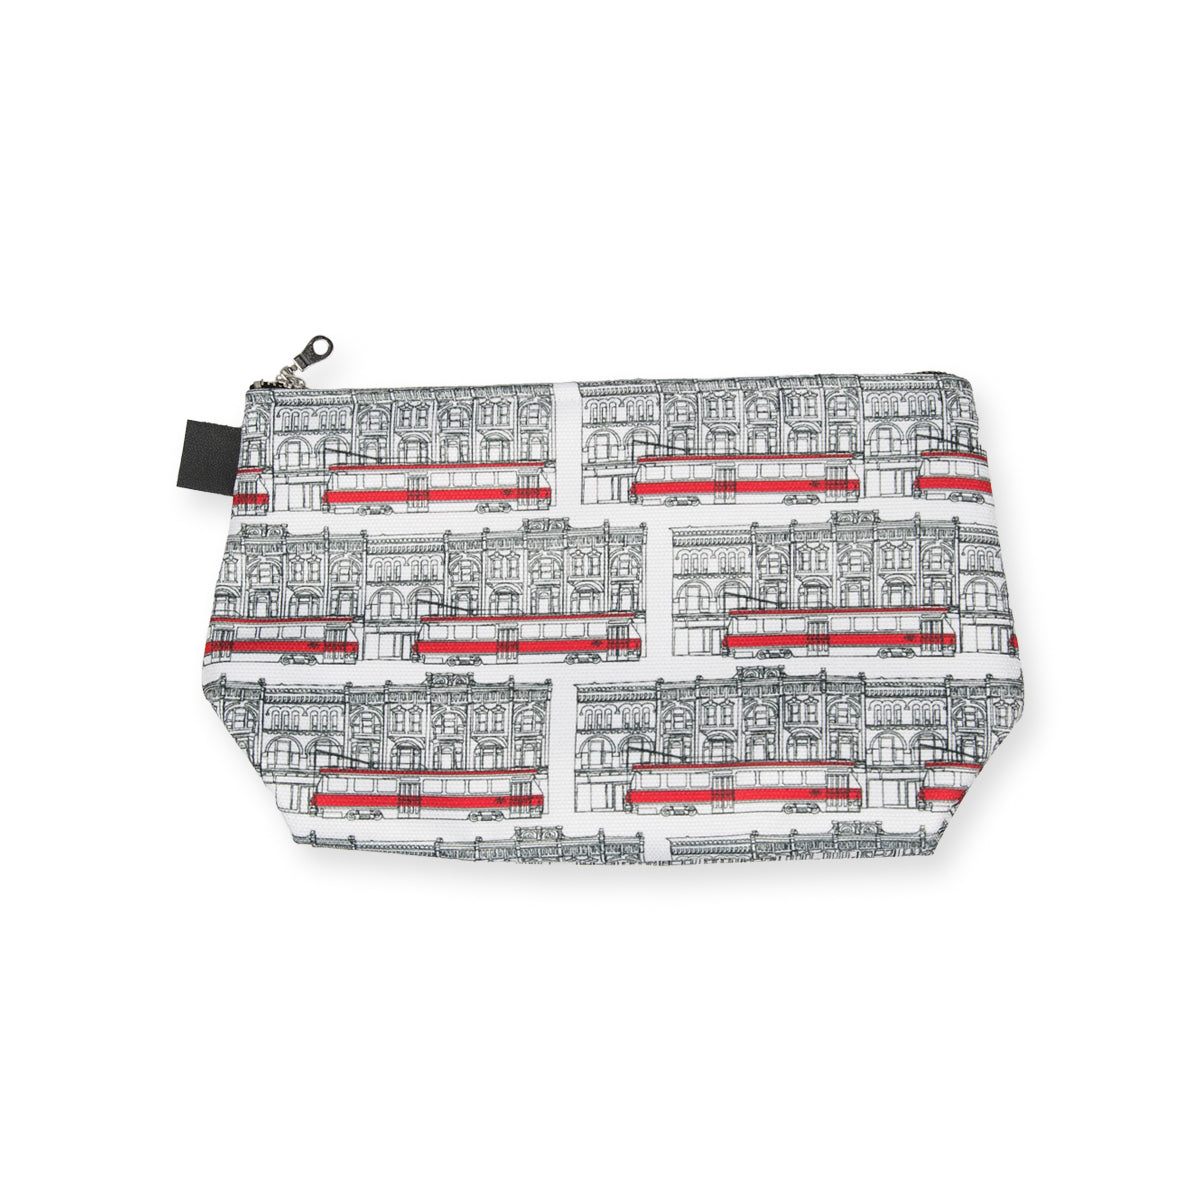 12" x 7" x 4" white gusseted travel bag with toronto street car illustration in black lines with red accents